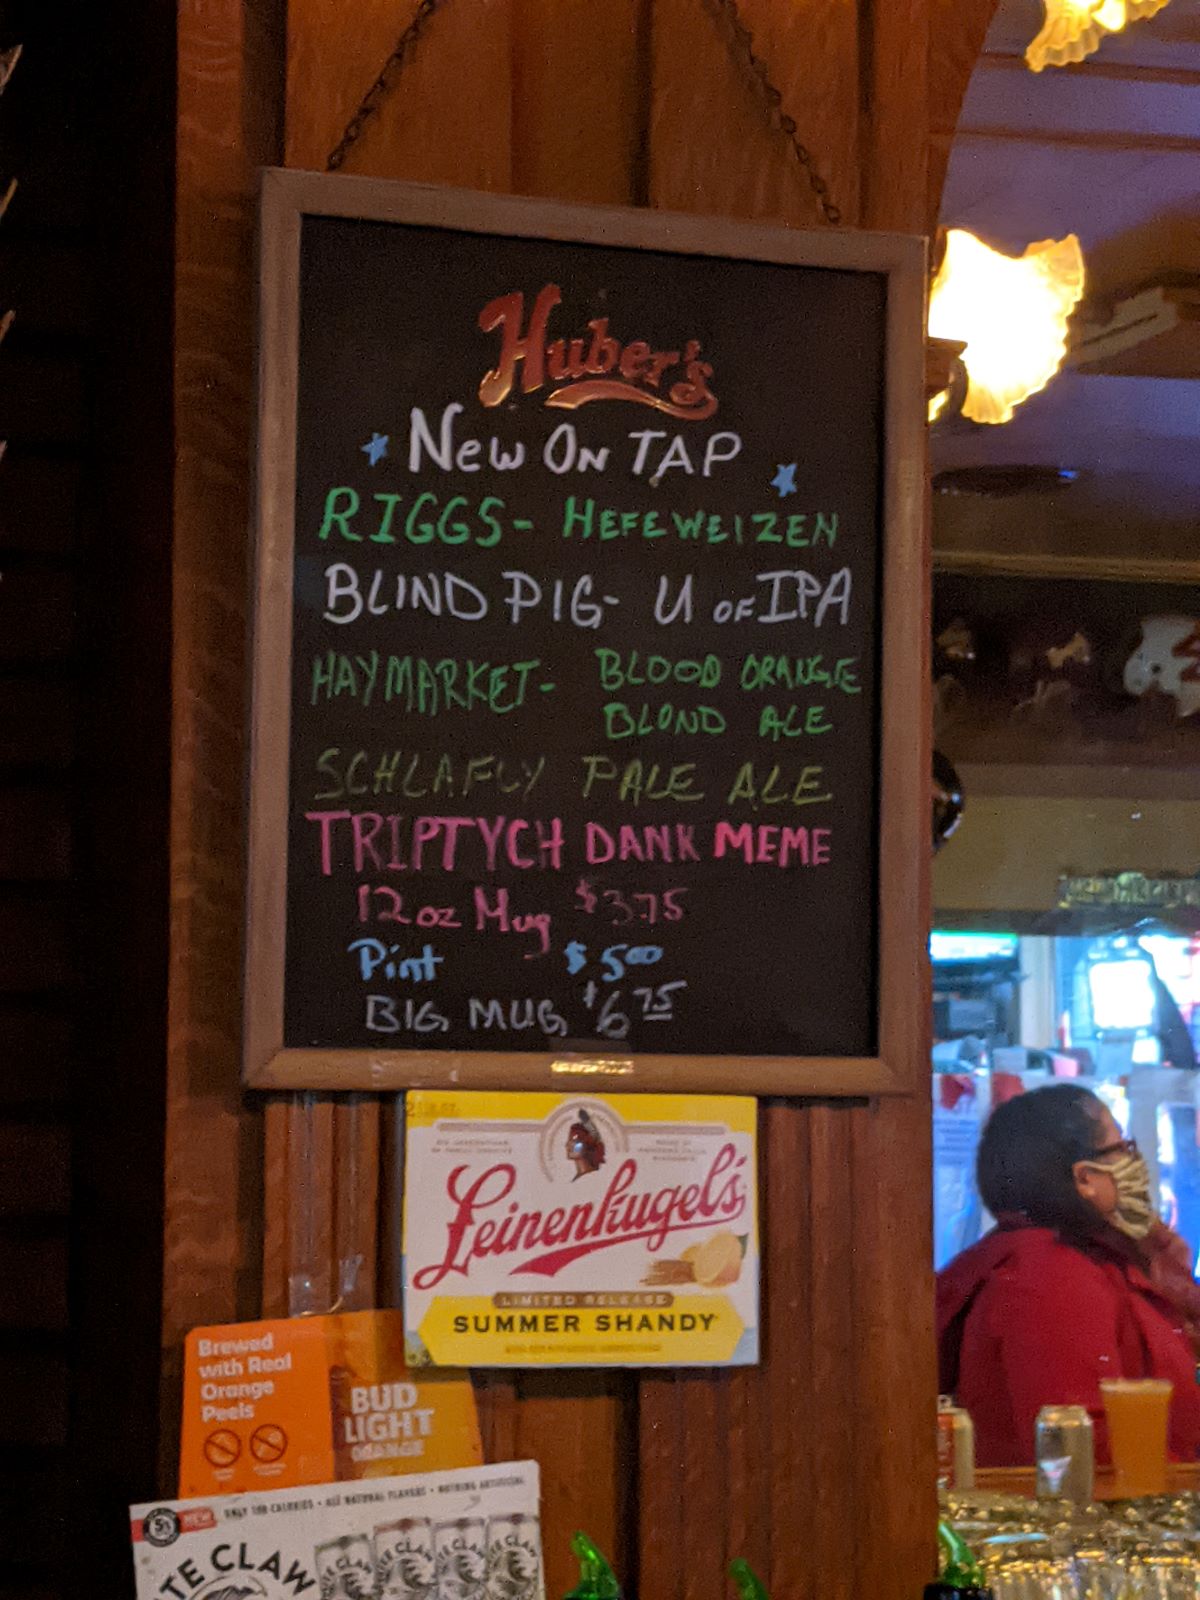 A wood-framed black chalkboard sign listing the local draft beers that are available on tap.  A yellow and white â€œLeinenkugelâ€™sâ€ sign is directly below the chalkboard.  To the right, we can see a mirror reflection of a masked patron sitting at the bar with a plastic cup of beer. Photo by Tias Paul.